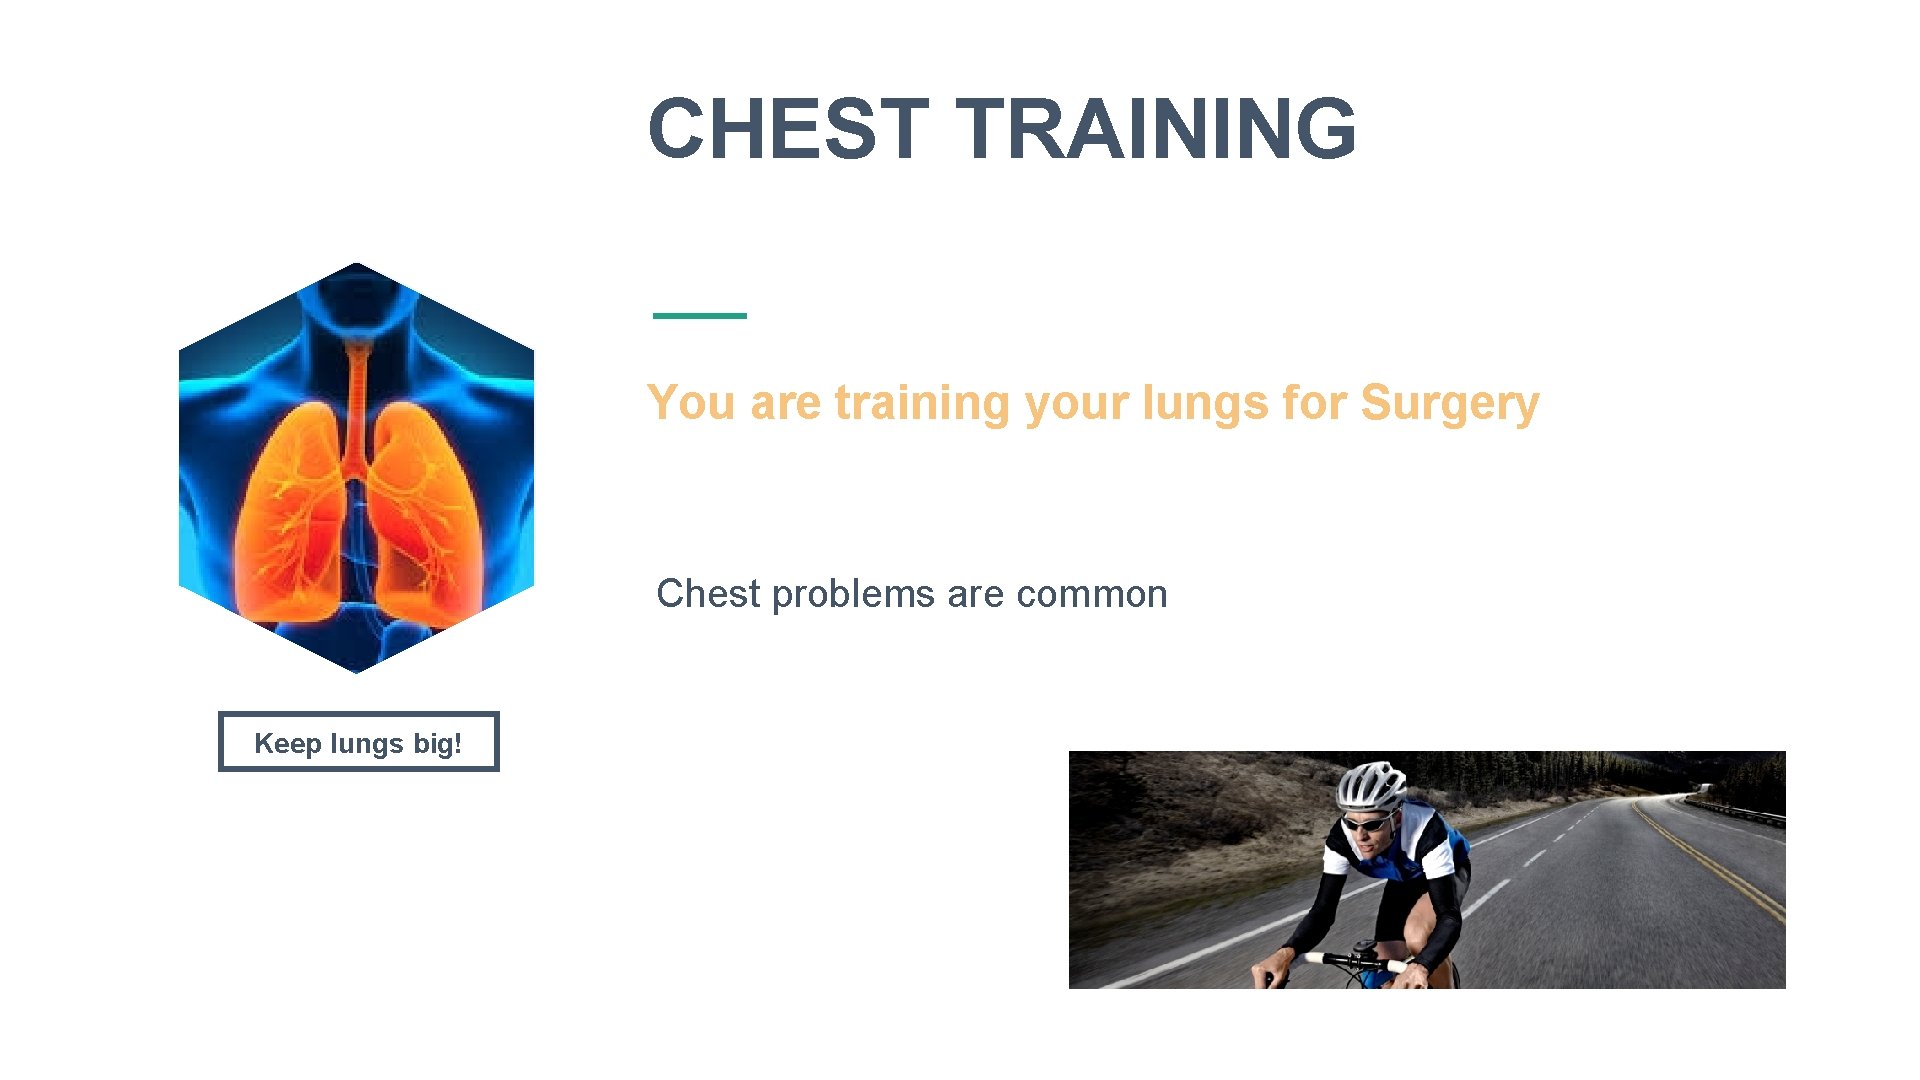 CHEST TRAINING You are training your lungs for Surgery Chest problems are common Keep